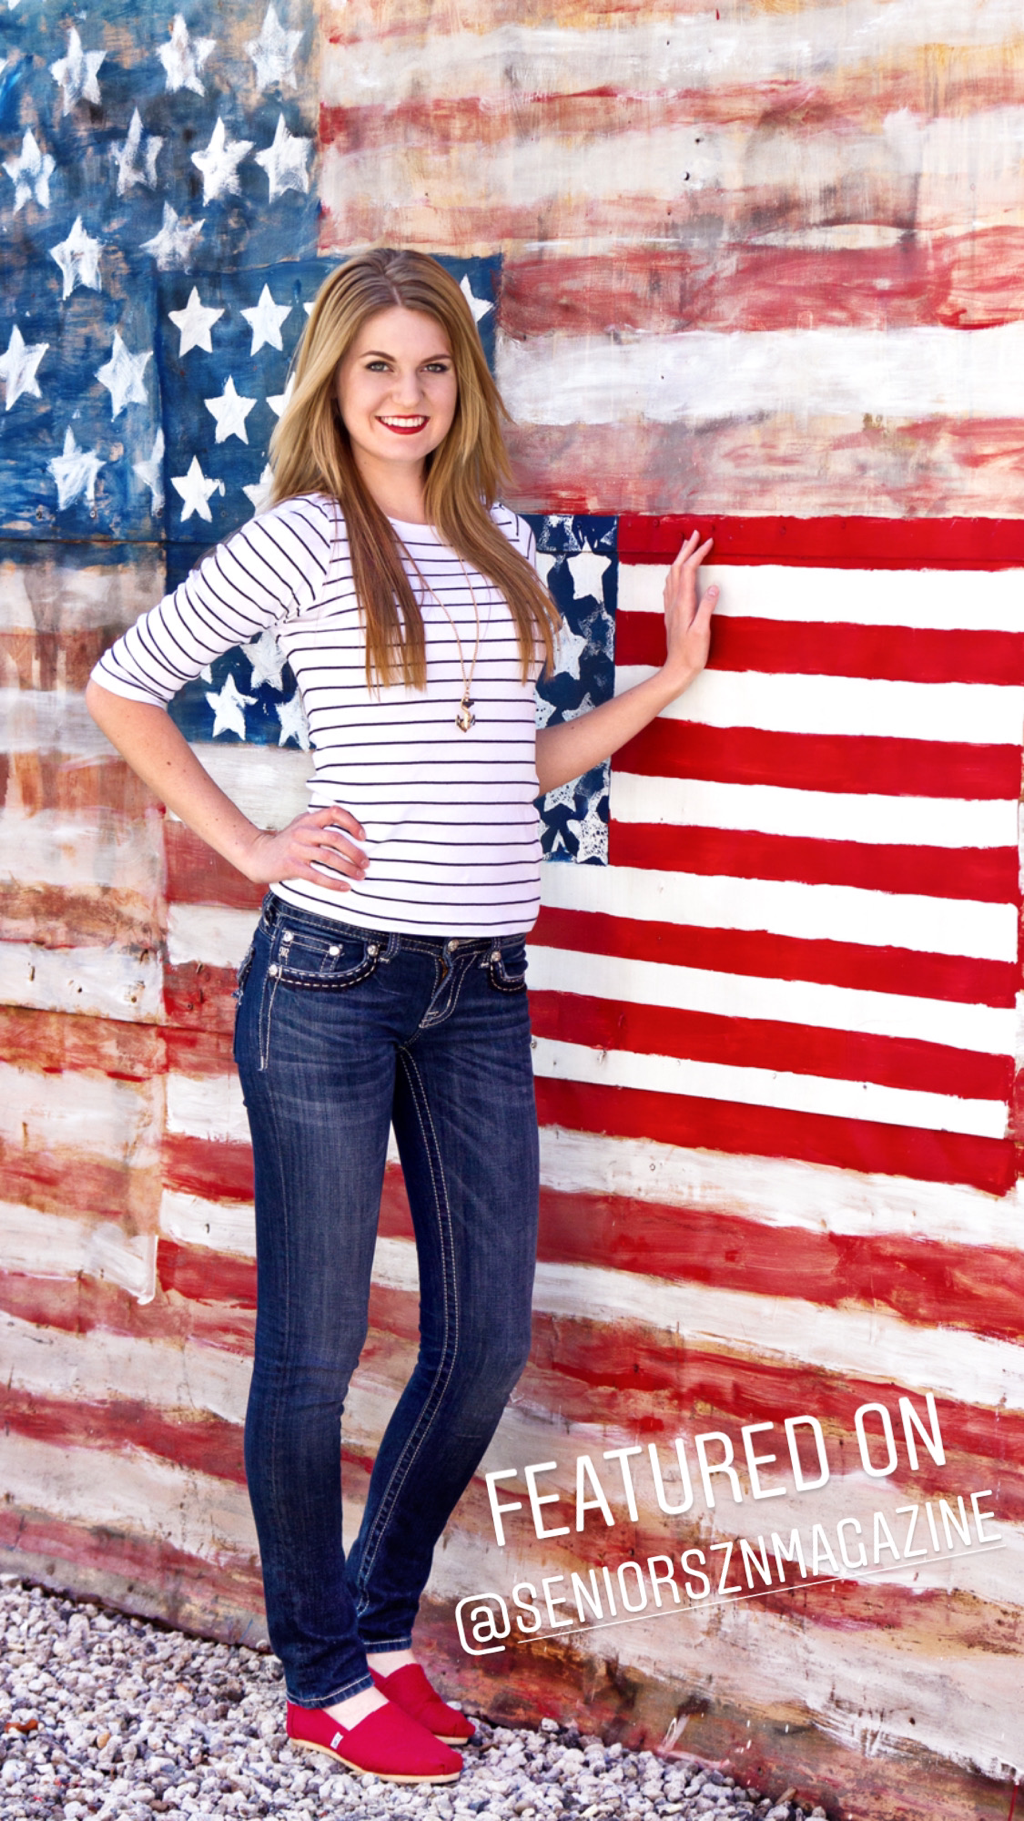 teenage girl with long blond hair and blue jeans standing next to US flag painting wall